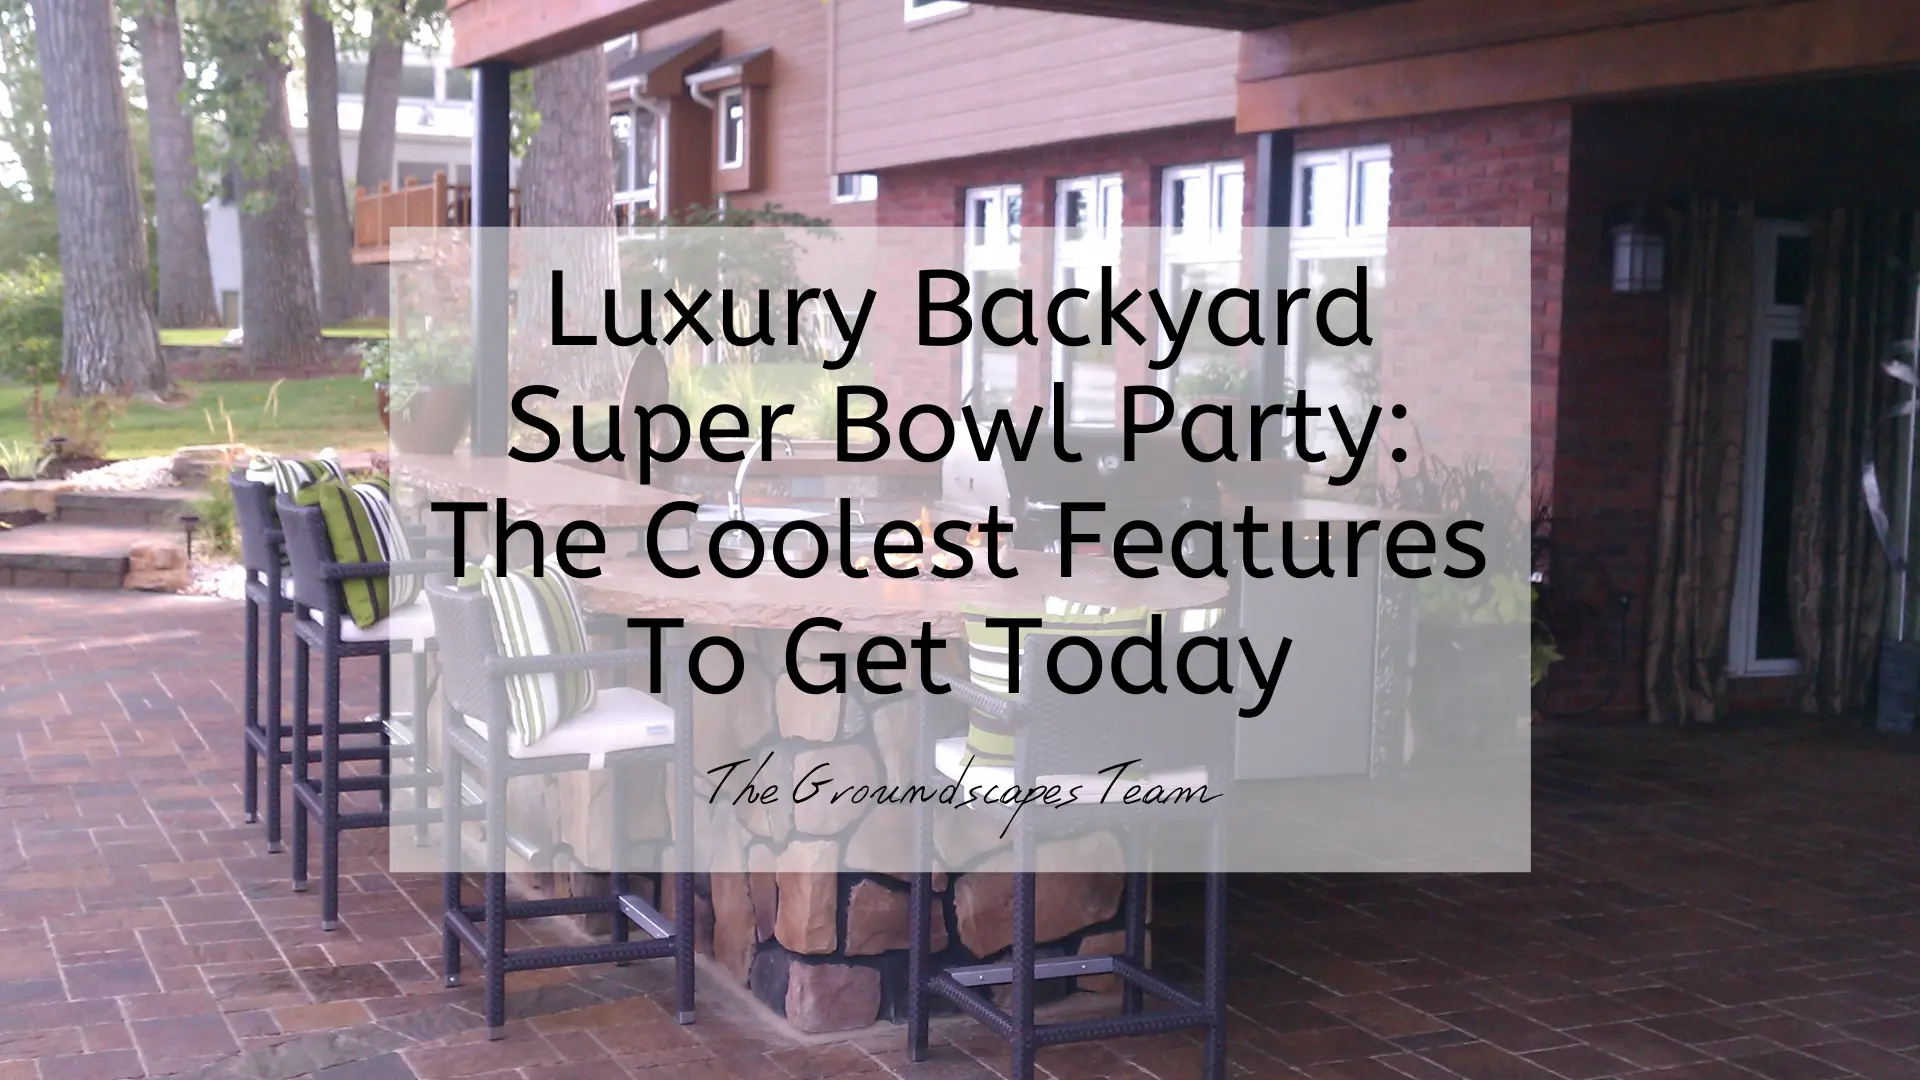 Luxury Backyard Super Bowl Party: The Coolest Features To Get Today